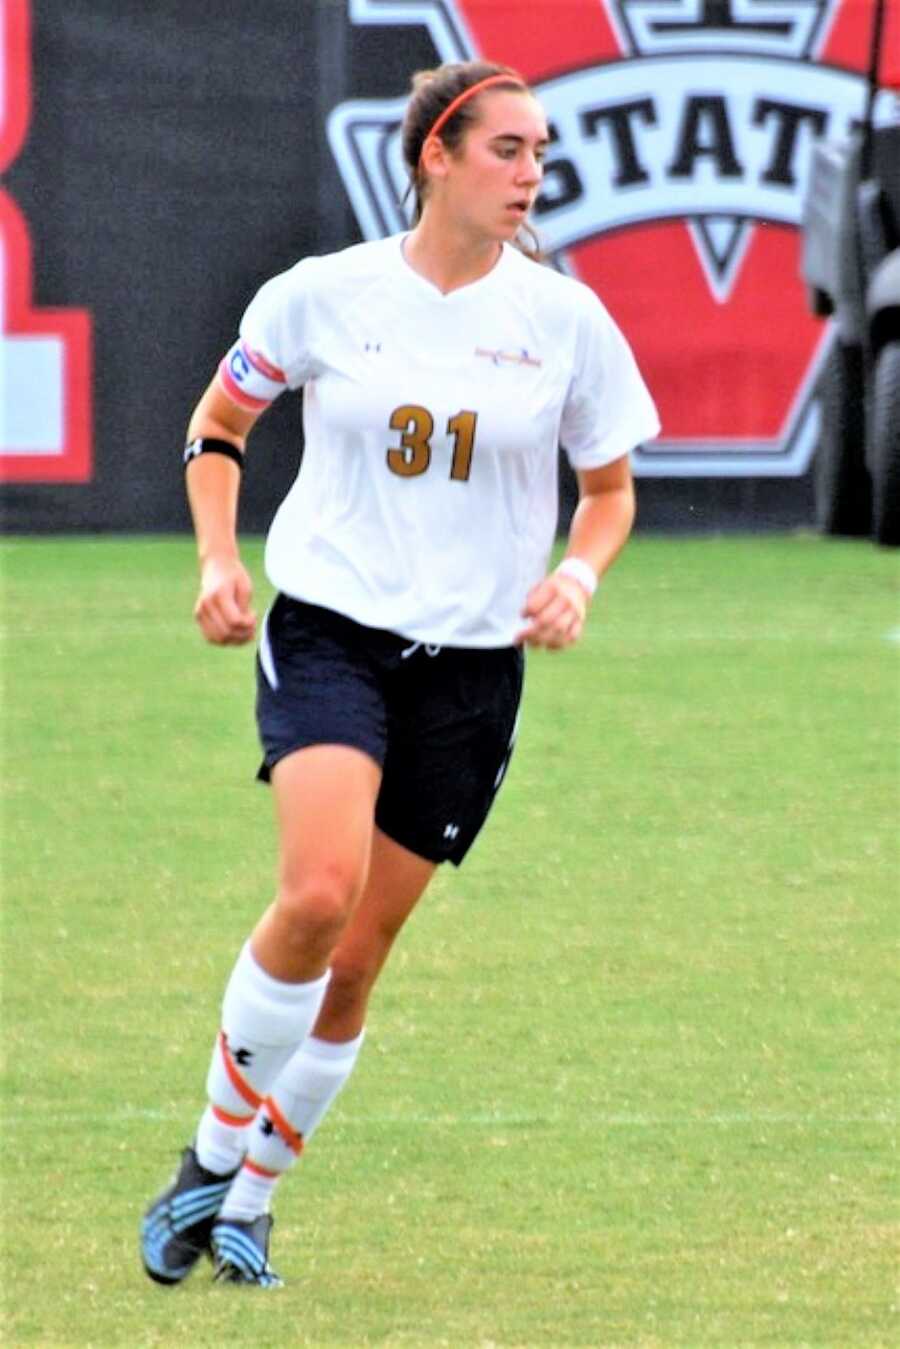 Young woman playing soccer in a black and white uniform 